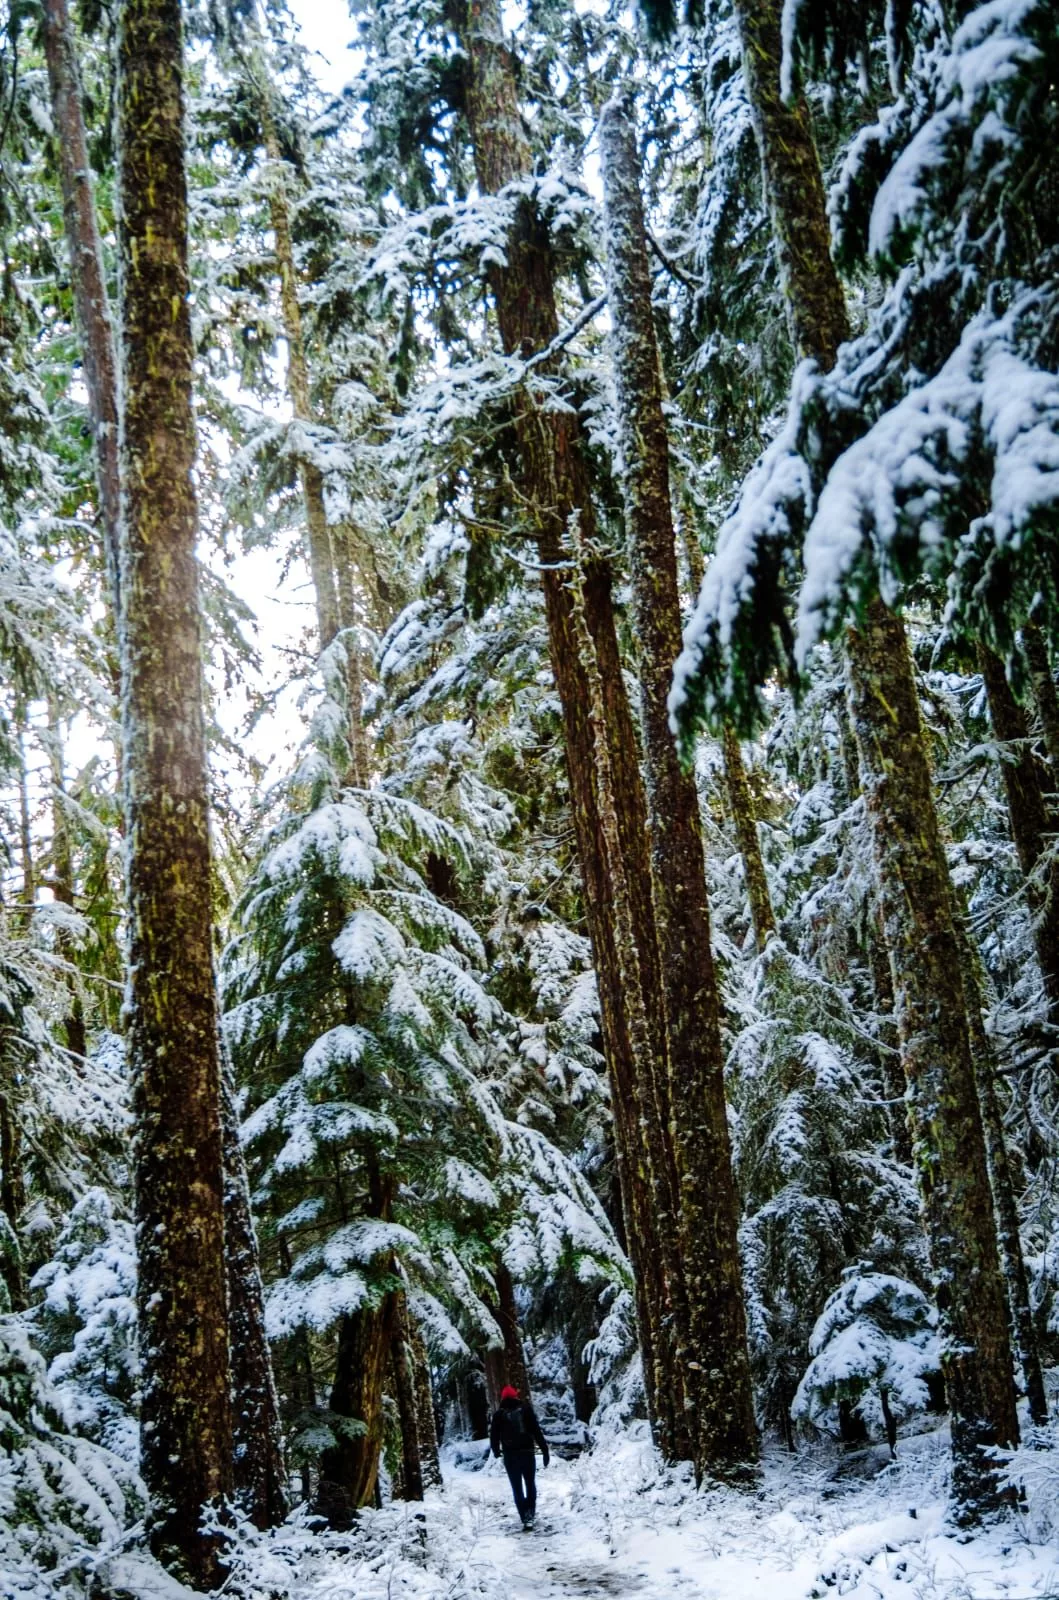 Tall trees covered in snow with a single person walking through the forest depicts a lonely winter.